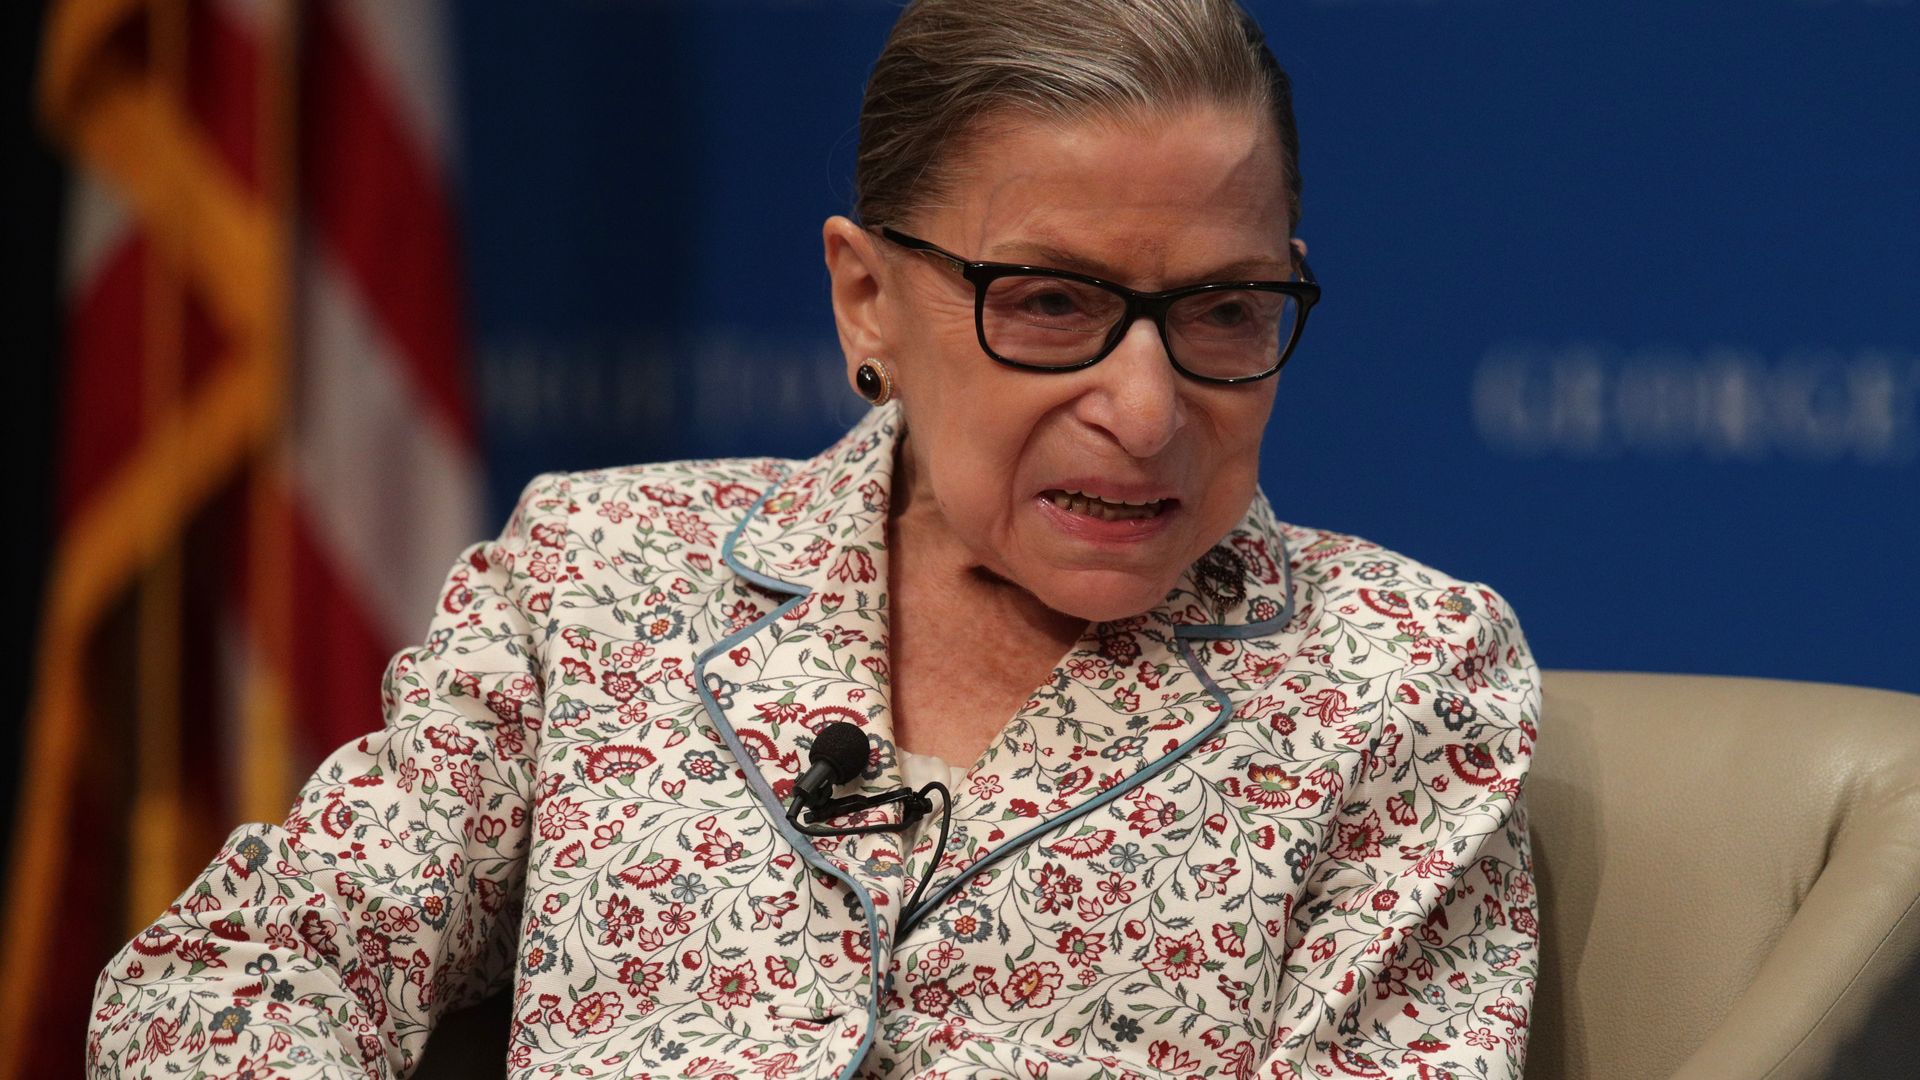 Justice Ruth Bader Ginsburg participates in a discussion at Georgetown University Law Center July 2